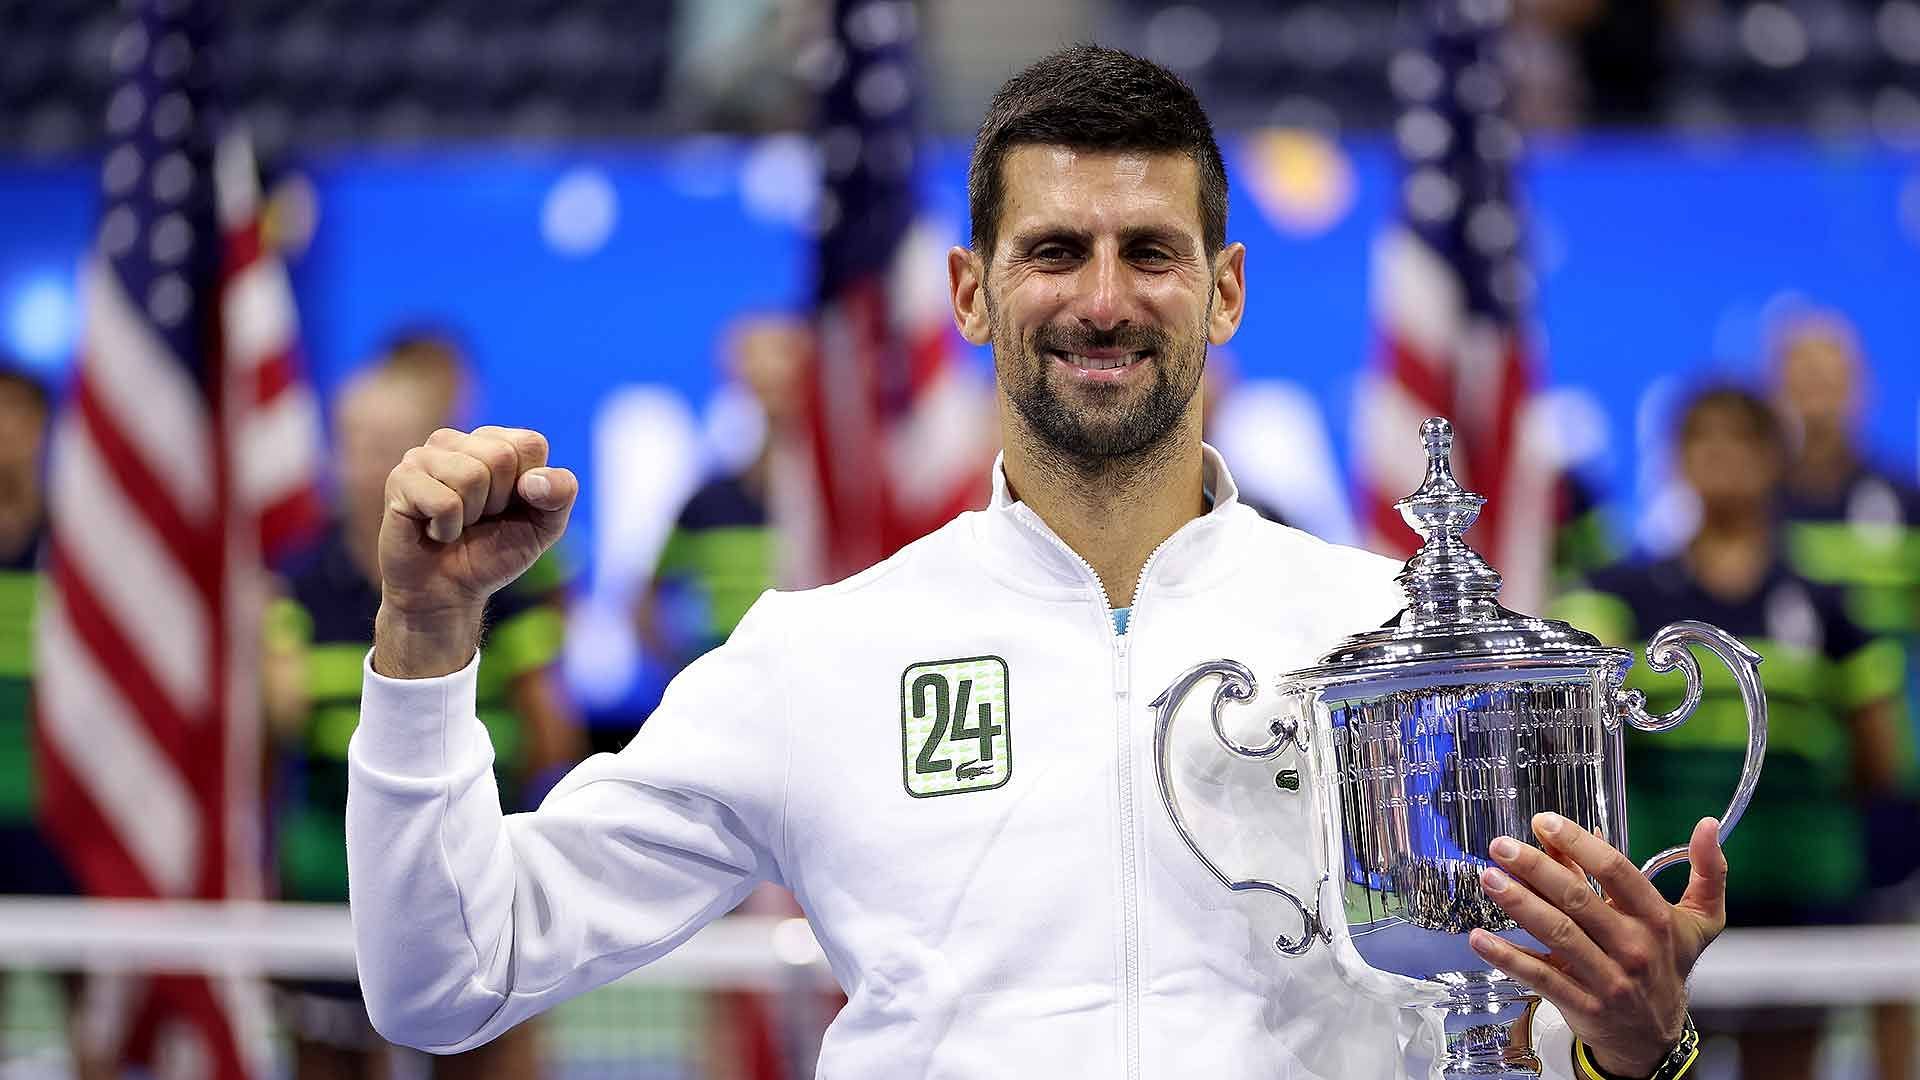 Novak Djokovic poses with the 2023 US Open trophy